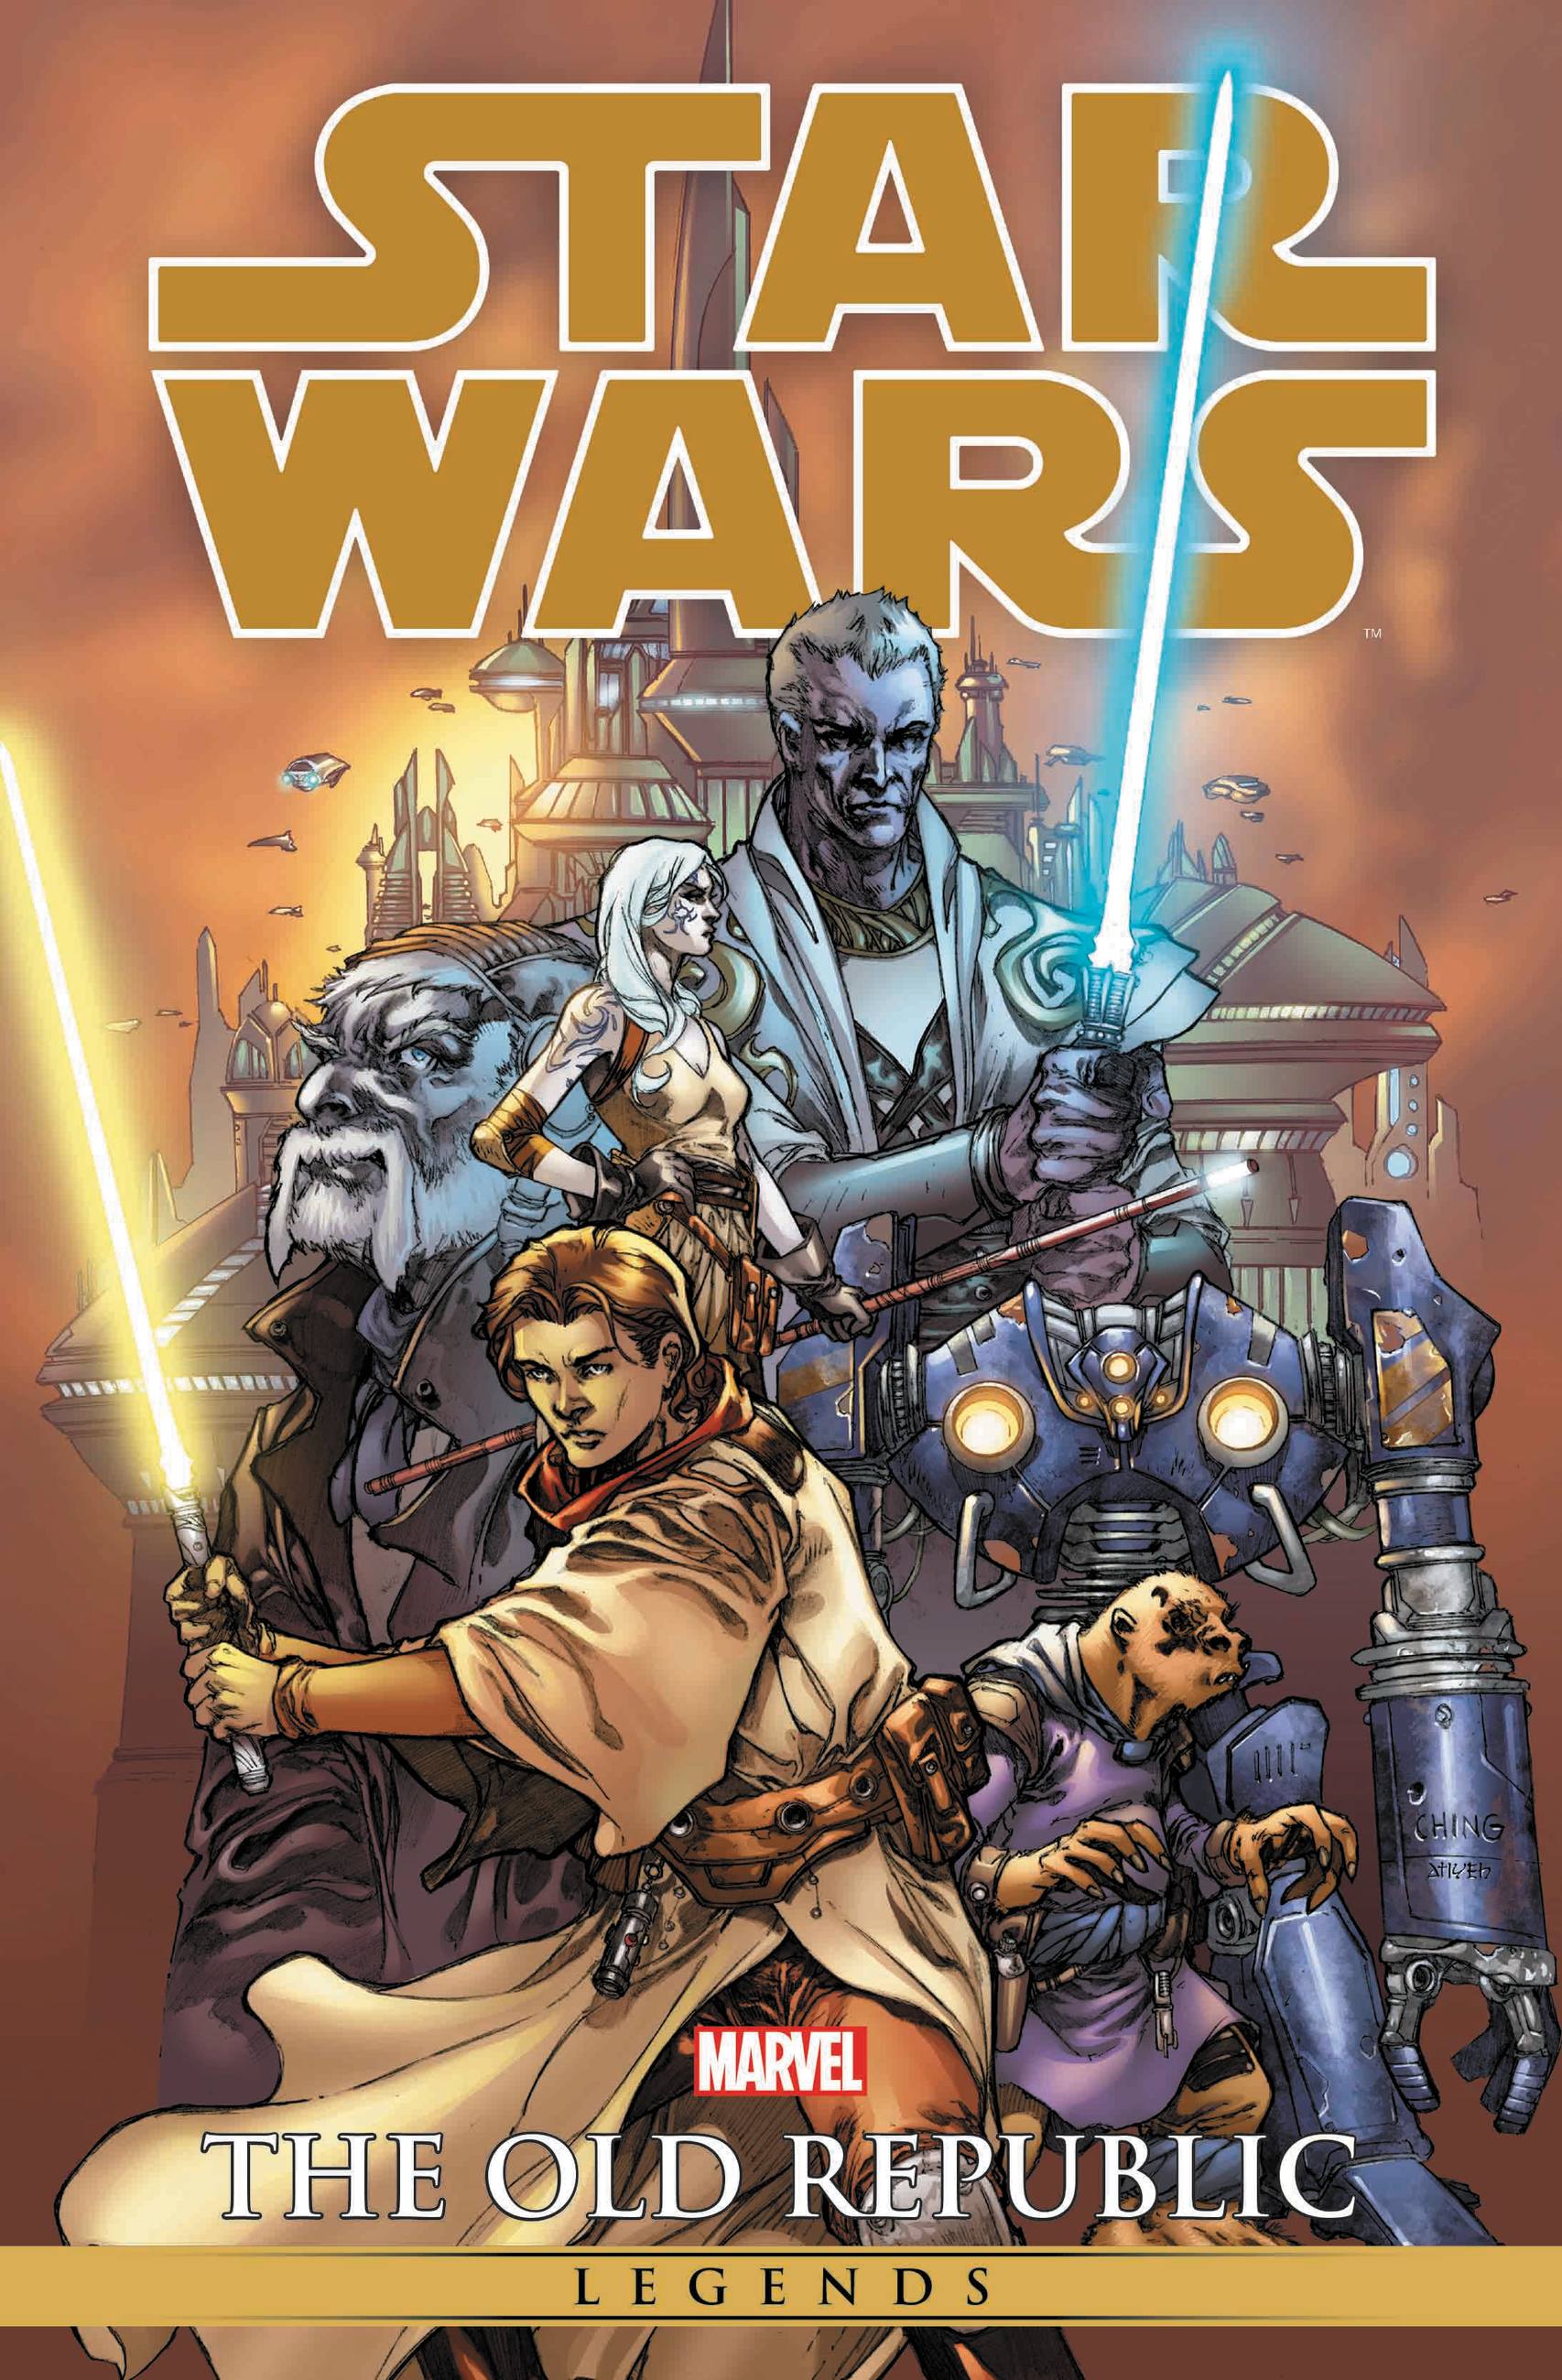 Star Wars: Knights of the Old Republic (comics) - Wikiwand